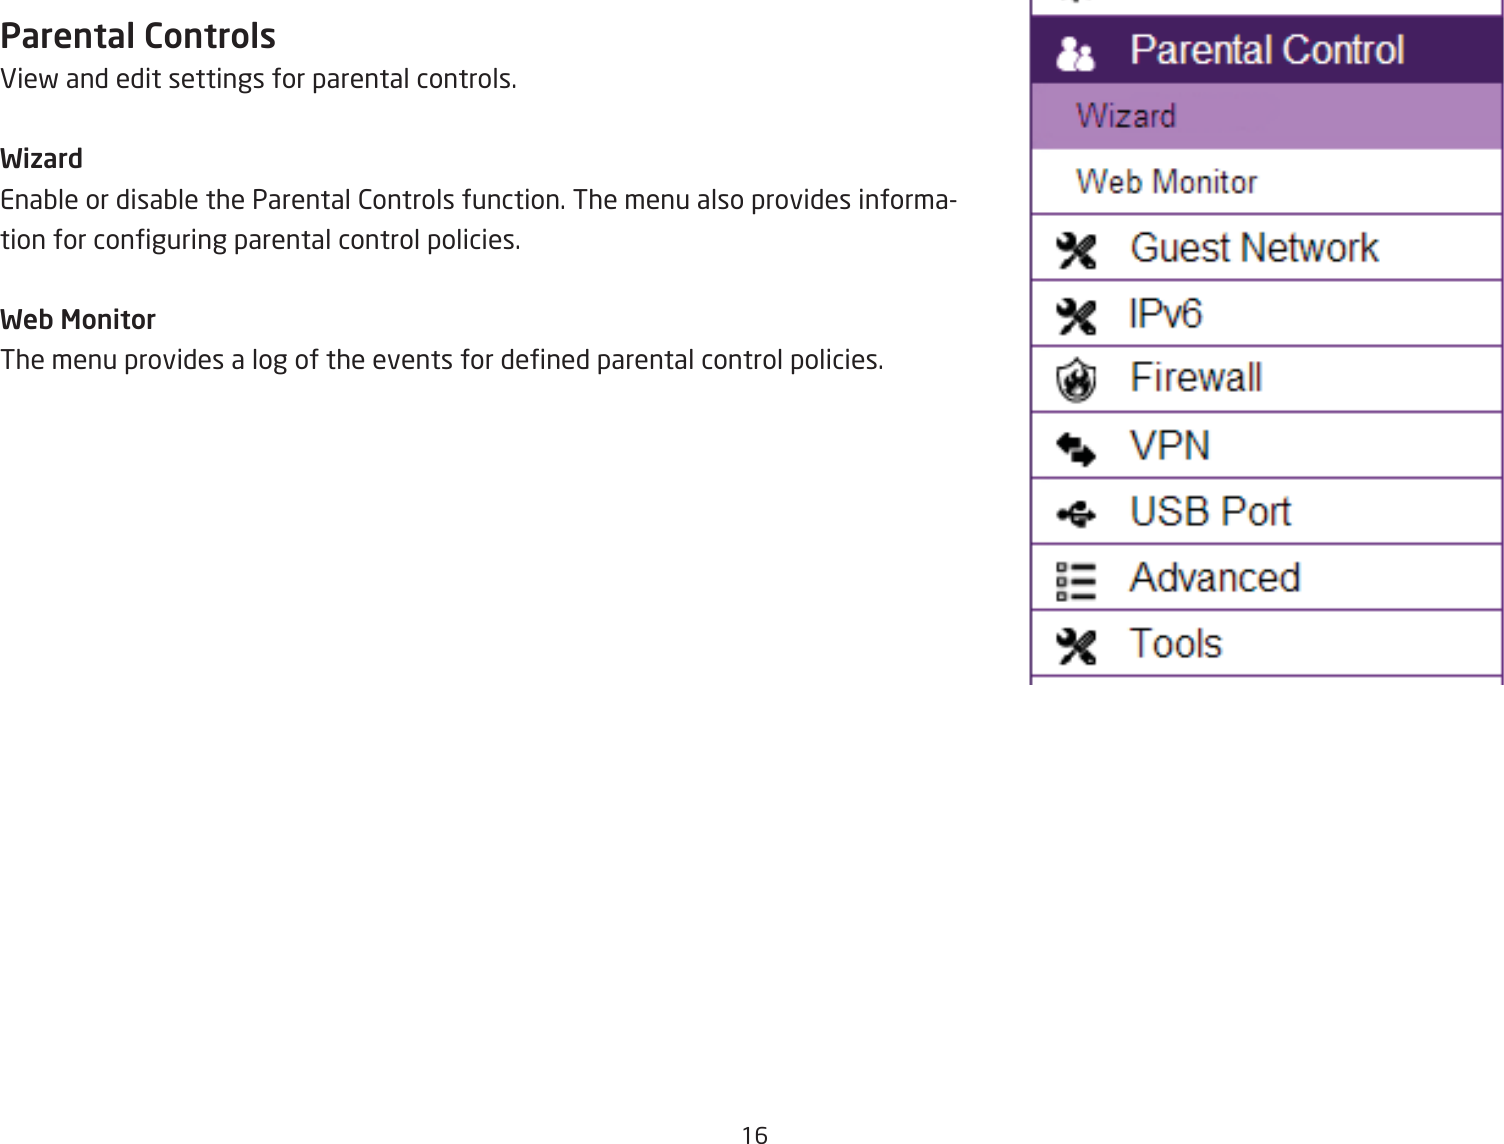 16Parental ControlsEief and edit settings for parental controls.WizardEnaQle or disaQle the Parental 2ontrols function. The menu also provides information for conguring parental control policies.Web MonitorThe menu provides a log of the events for dened parental control policies.